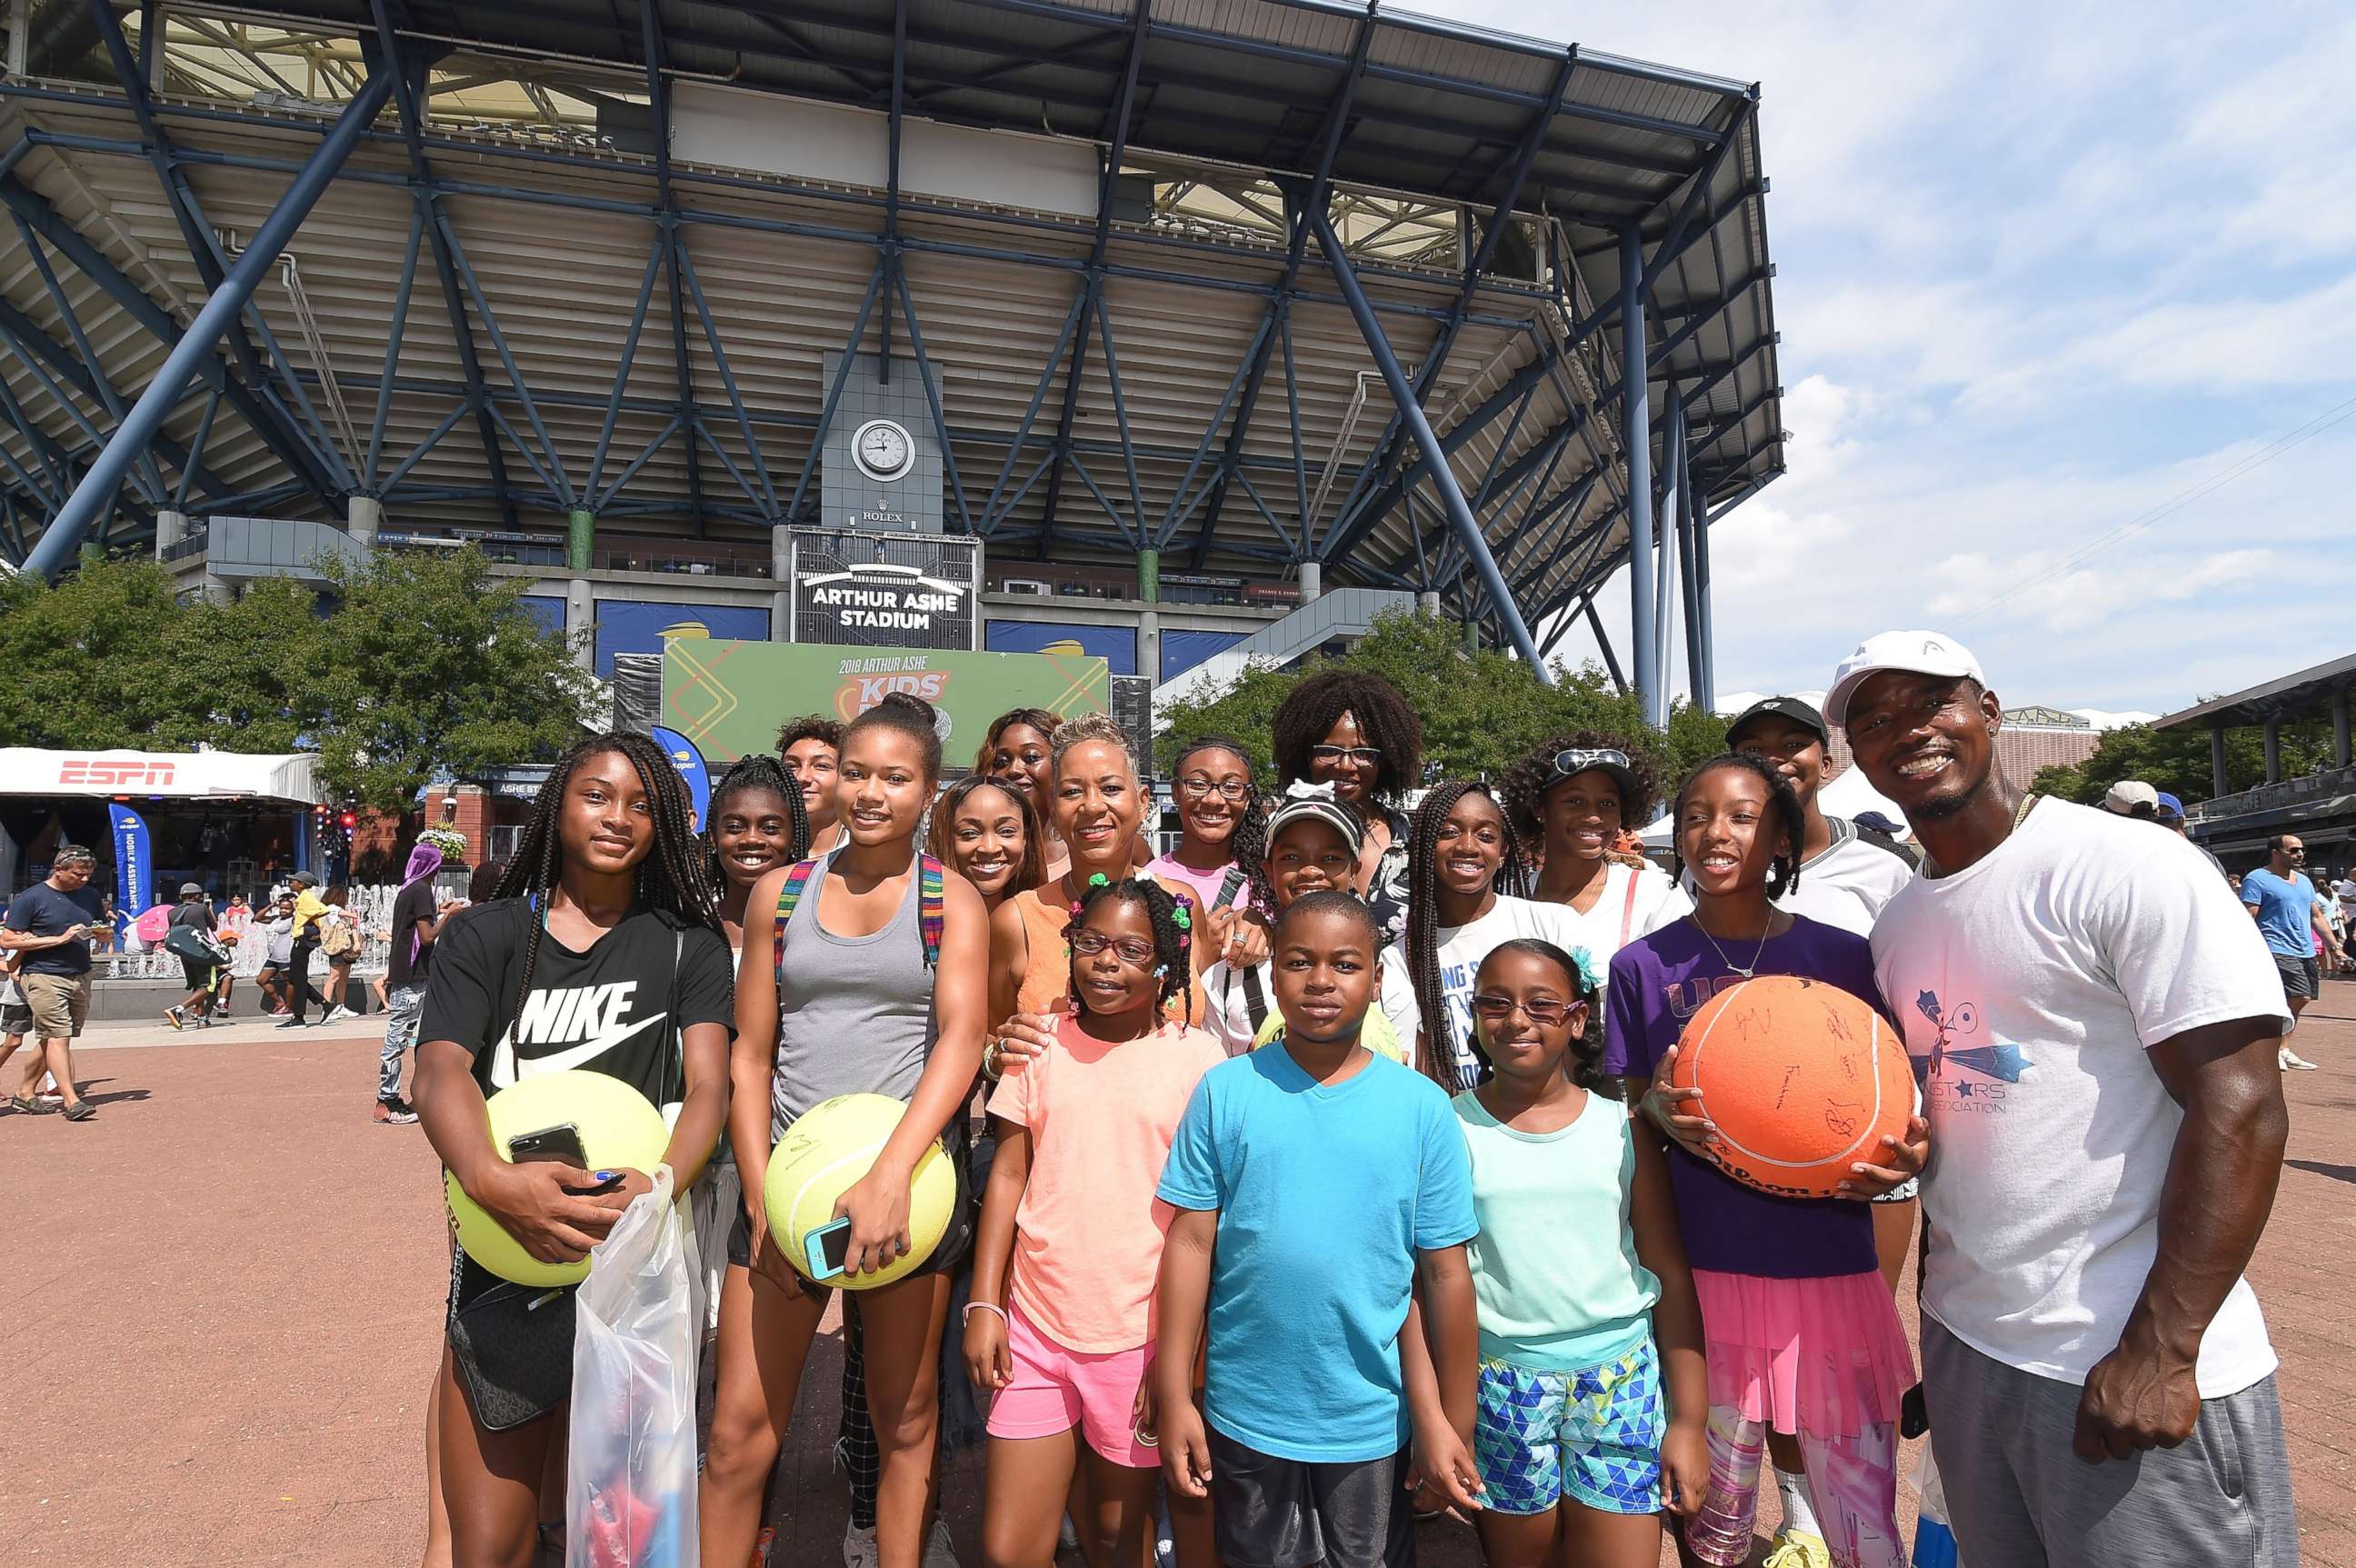 PHOTO: Katrina Adams, USTA President and Chairman, poses with fans at the 2018 US Open.